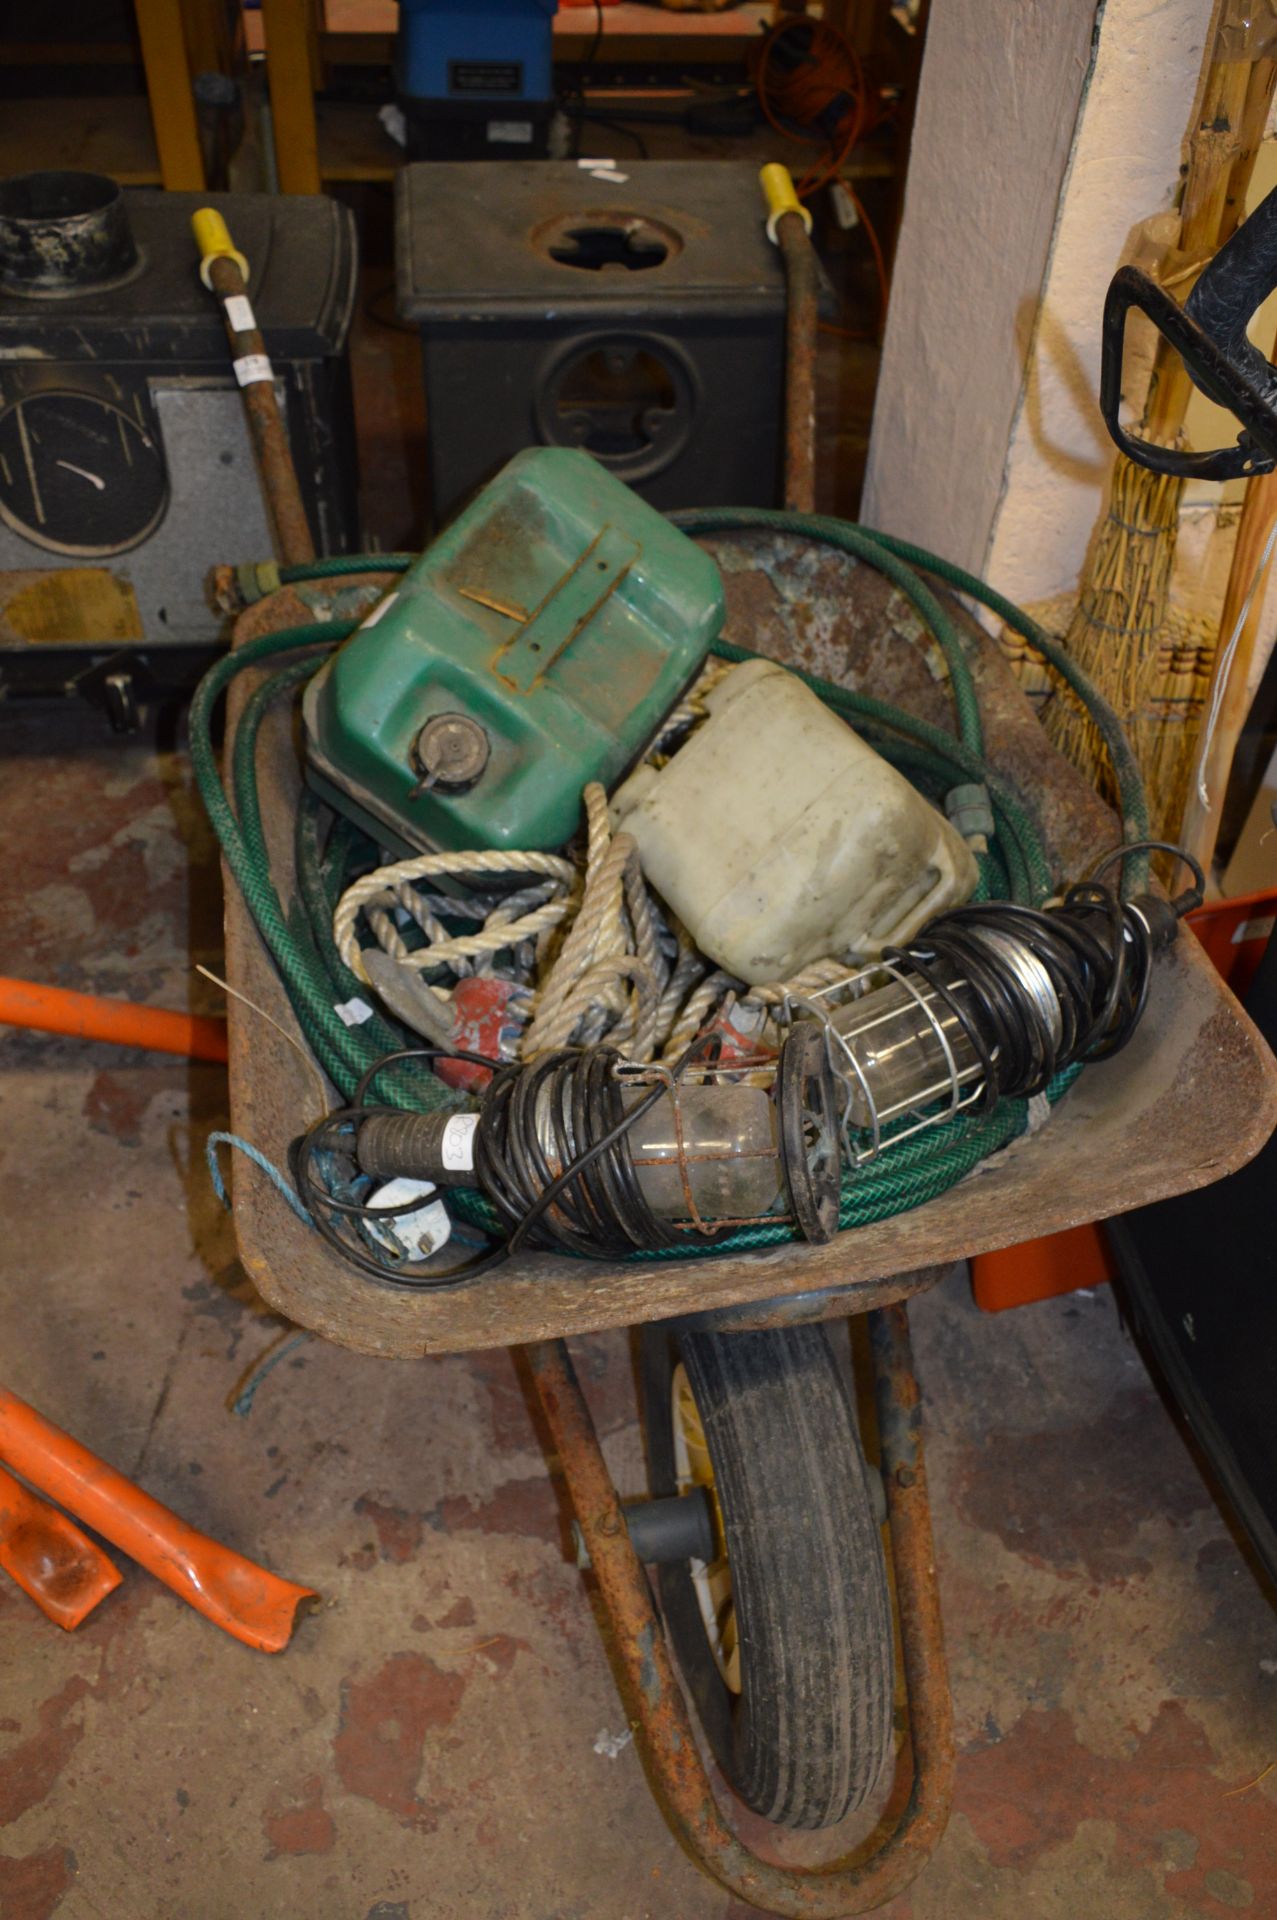 Wheelbarrow and Contents; Inspection Lamps, Petrol Can, Ropes and Pulley, etc.